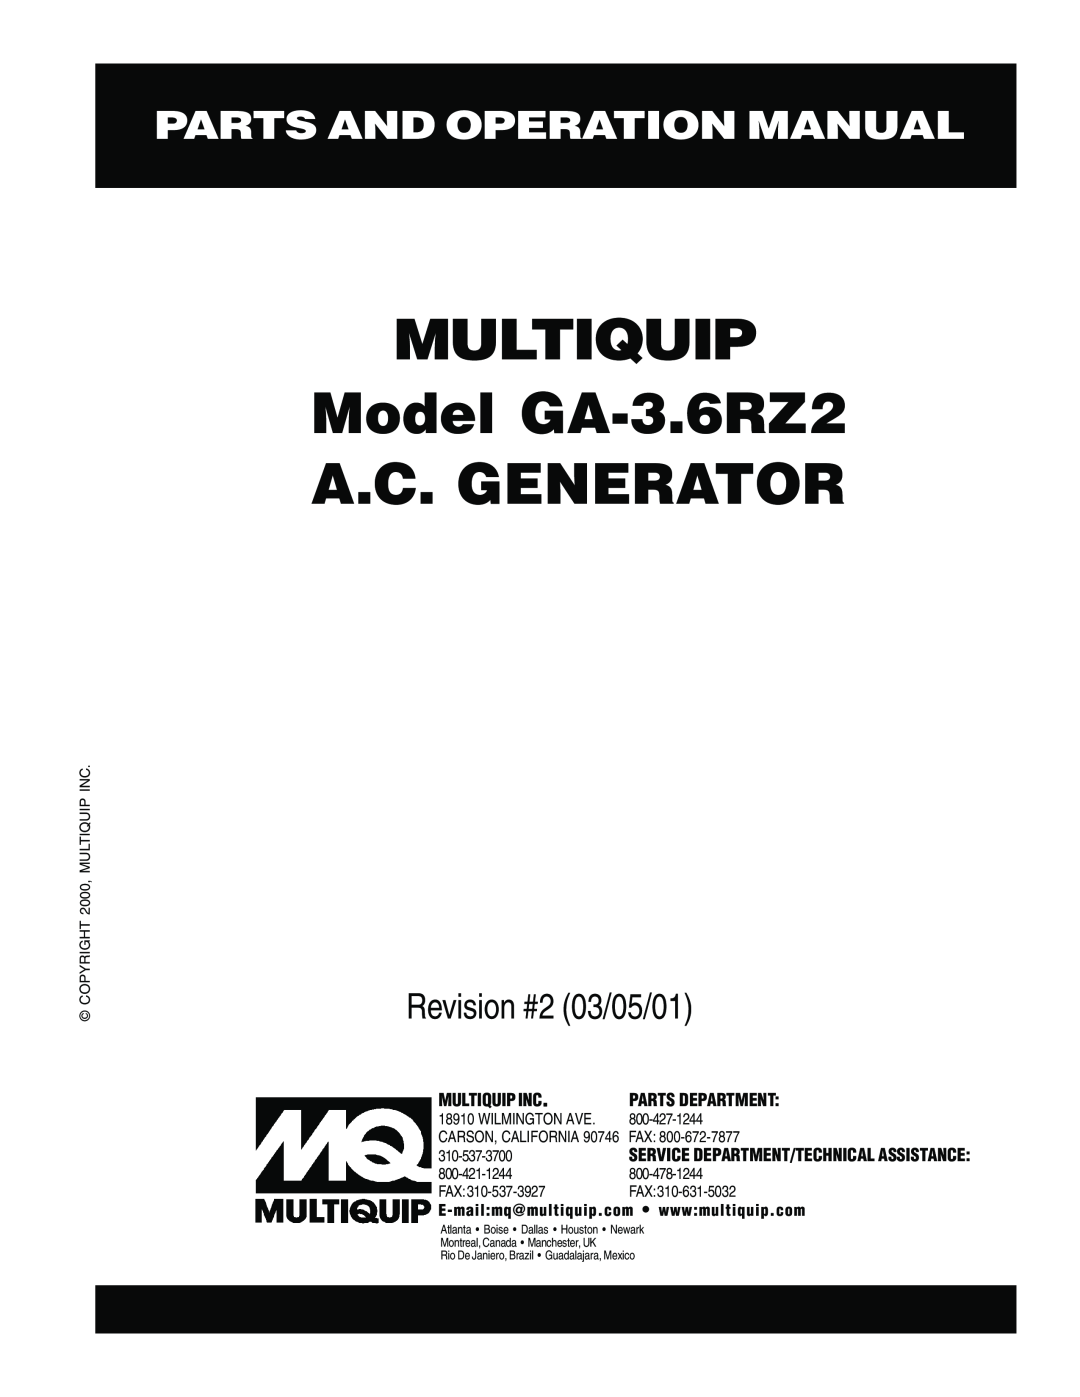 Multiquip operation manual MULTIQUIP Model GA-3.6RZ2 A.C. GENERATOR, Parts And Operation Manual, Revision #2 03/05/01 